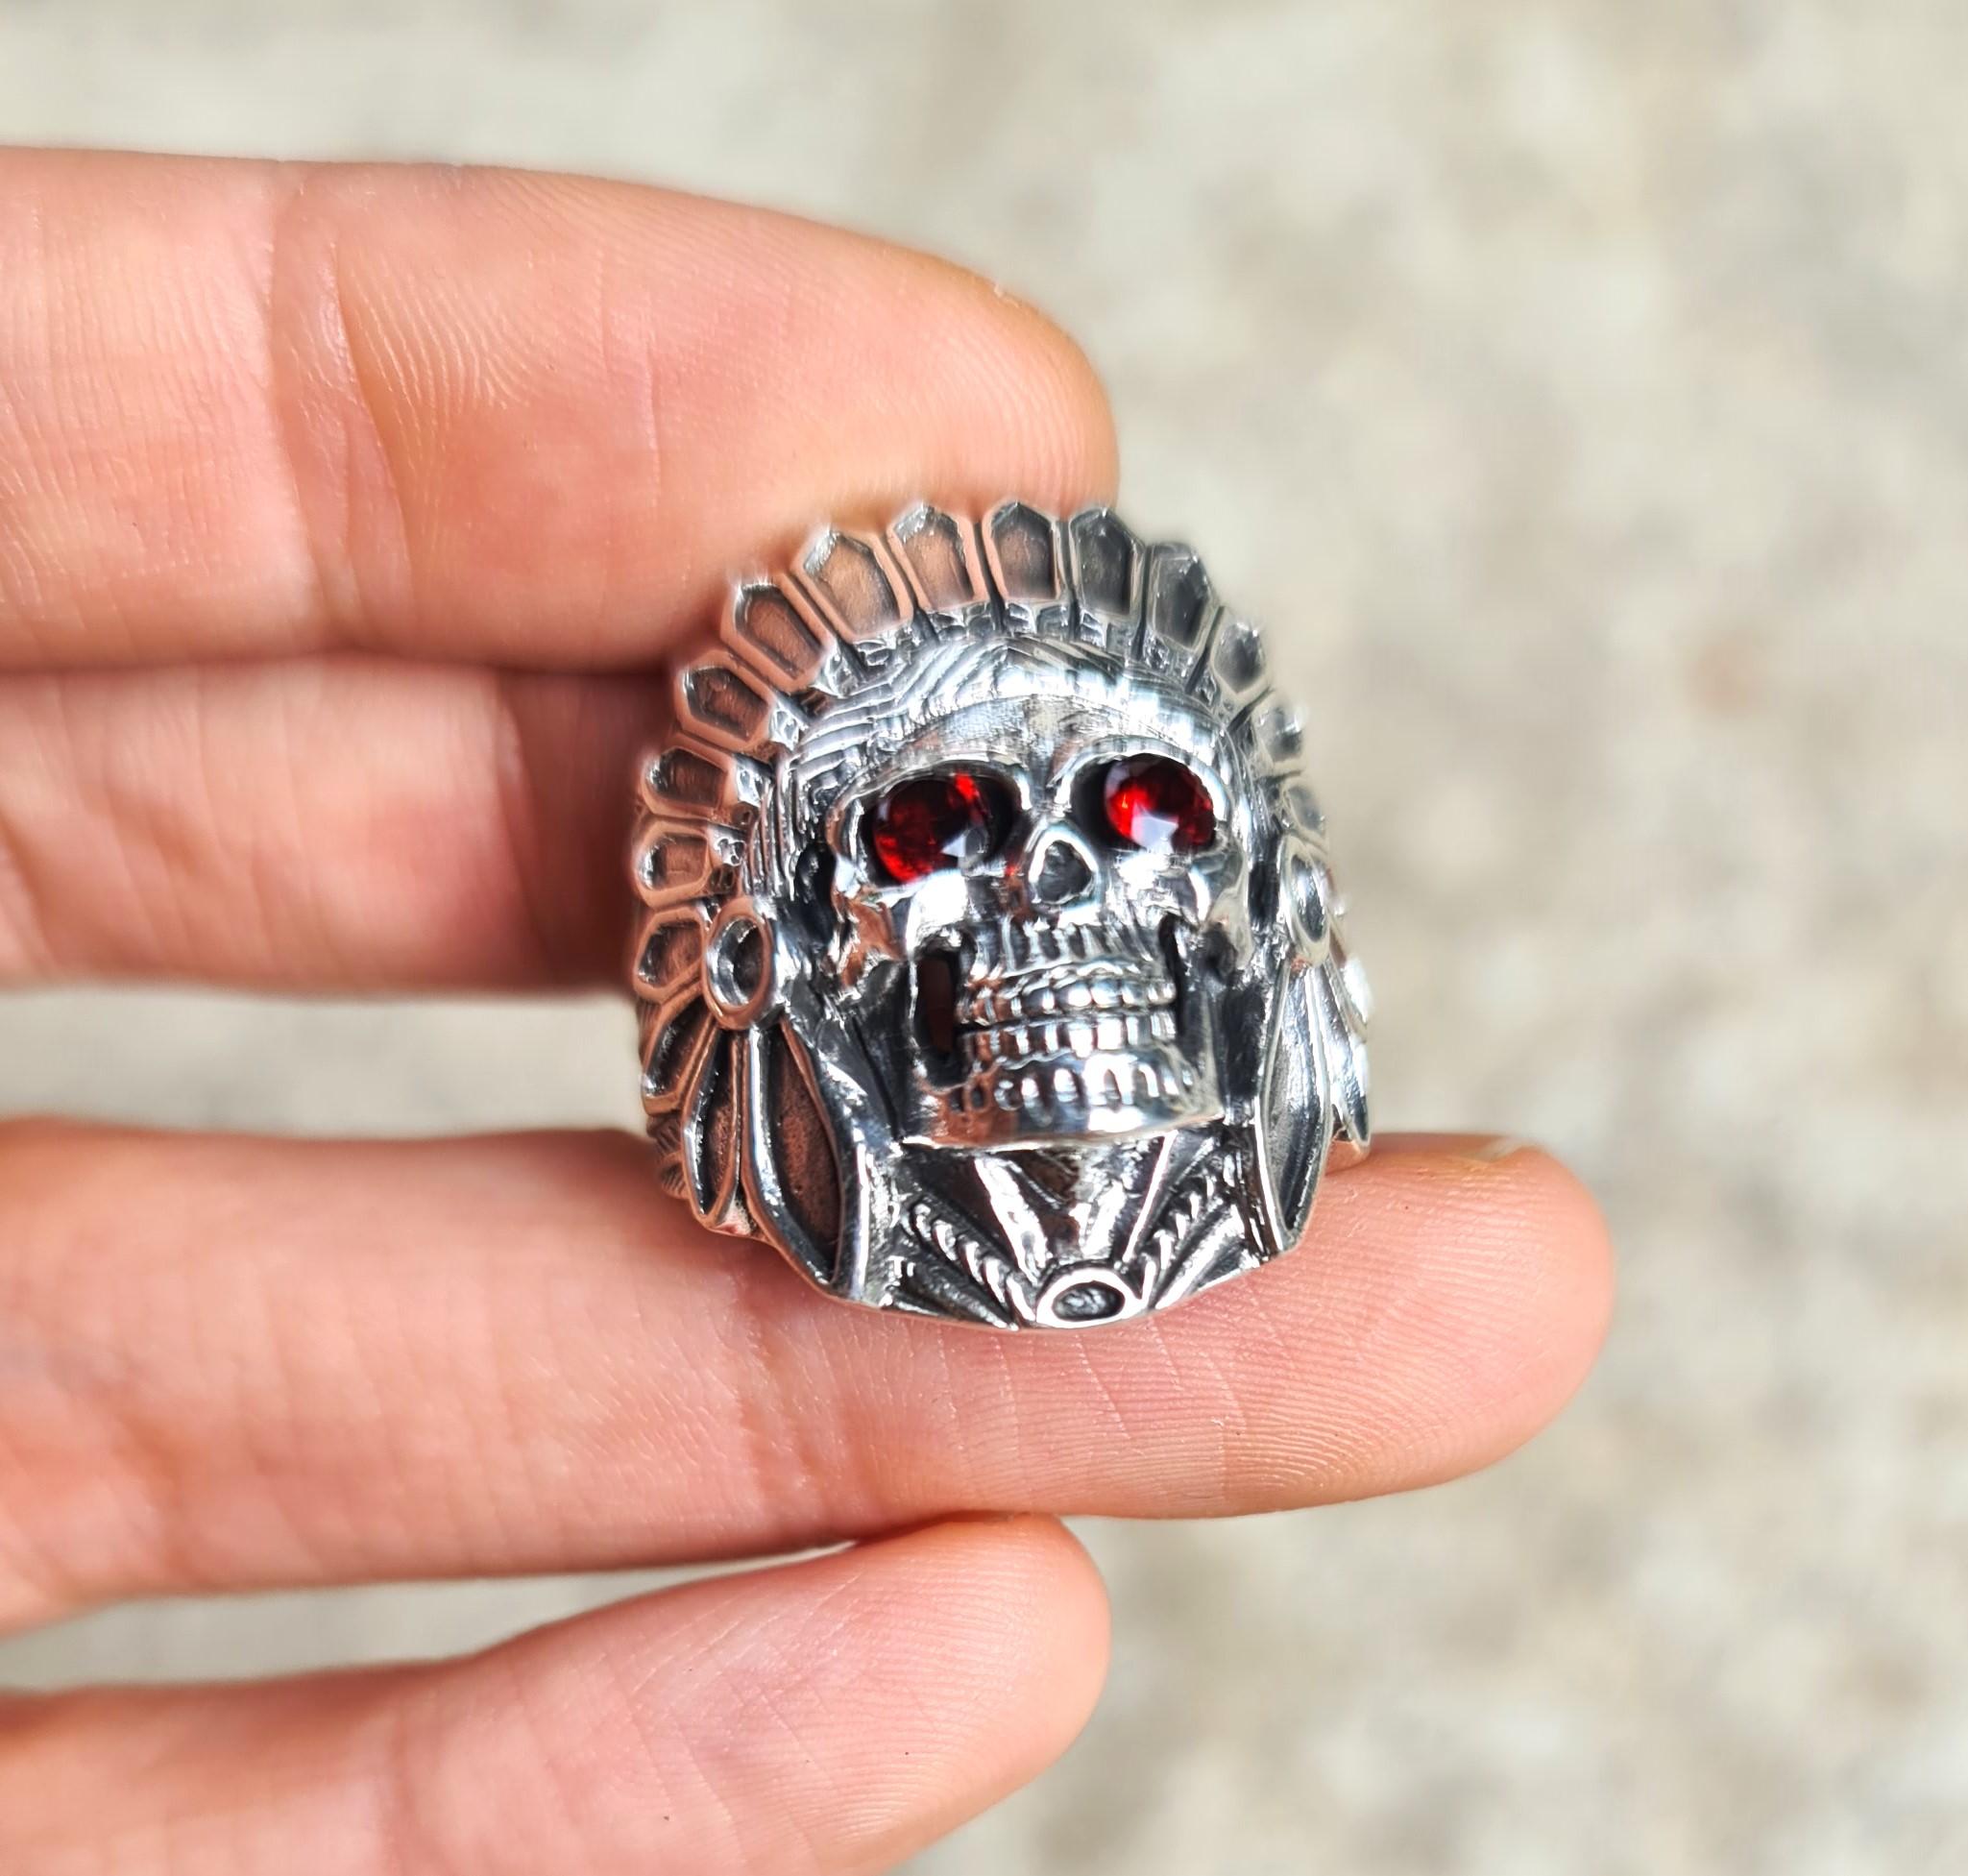 Garnet Eyes American Indian Skull Tribal Chief Warrior Ring Sterling Silver 925 For Sale 2